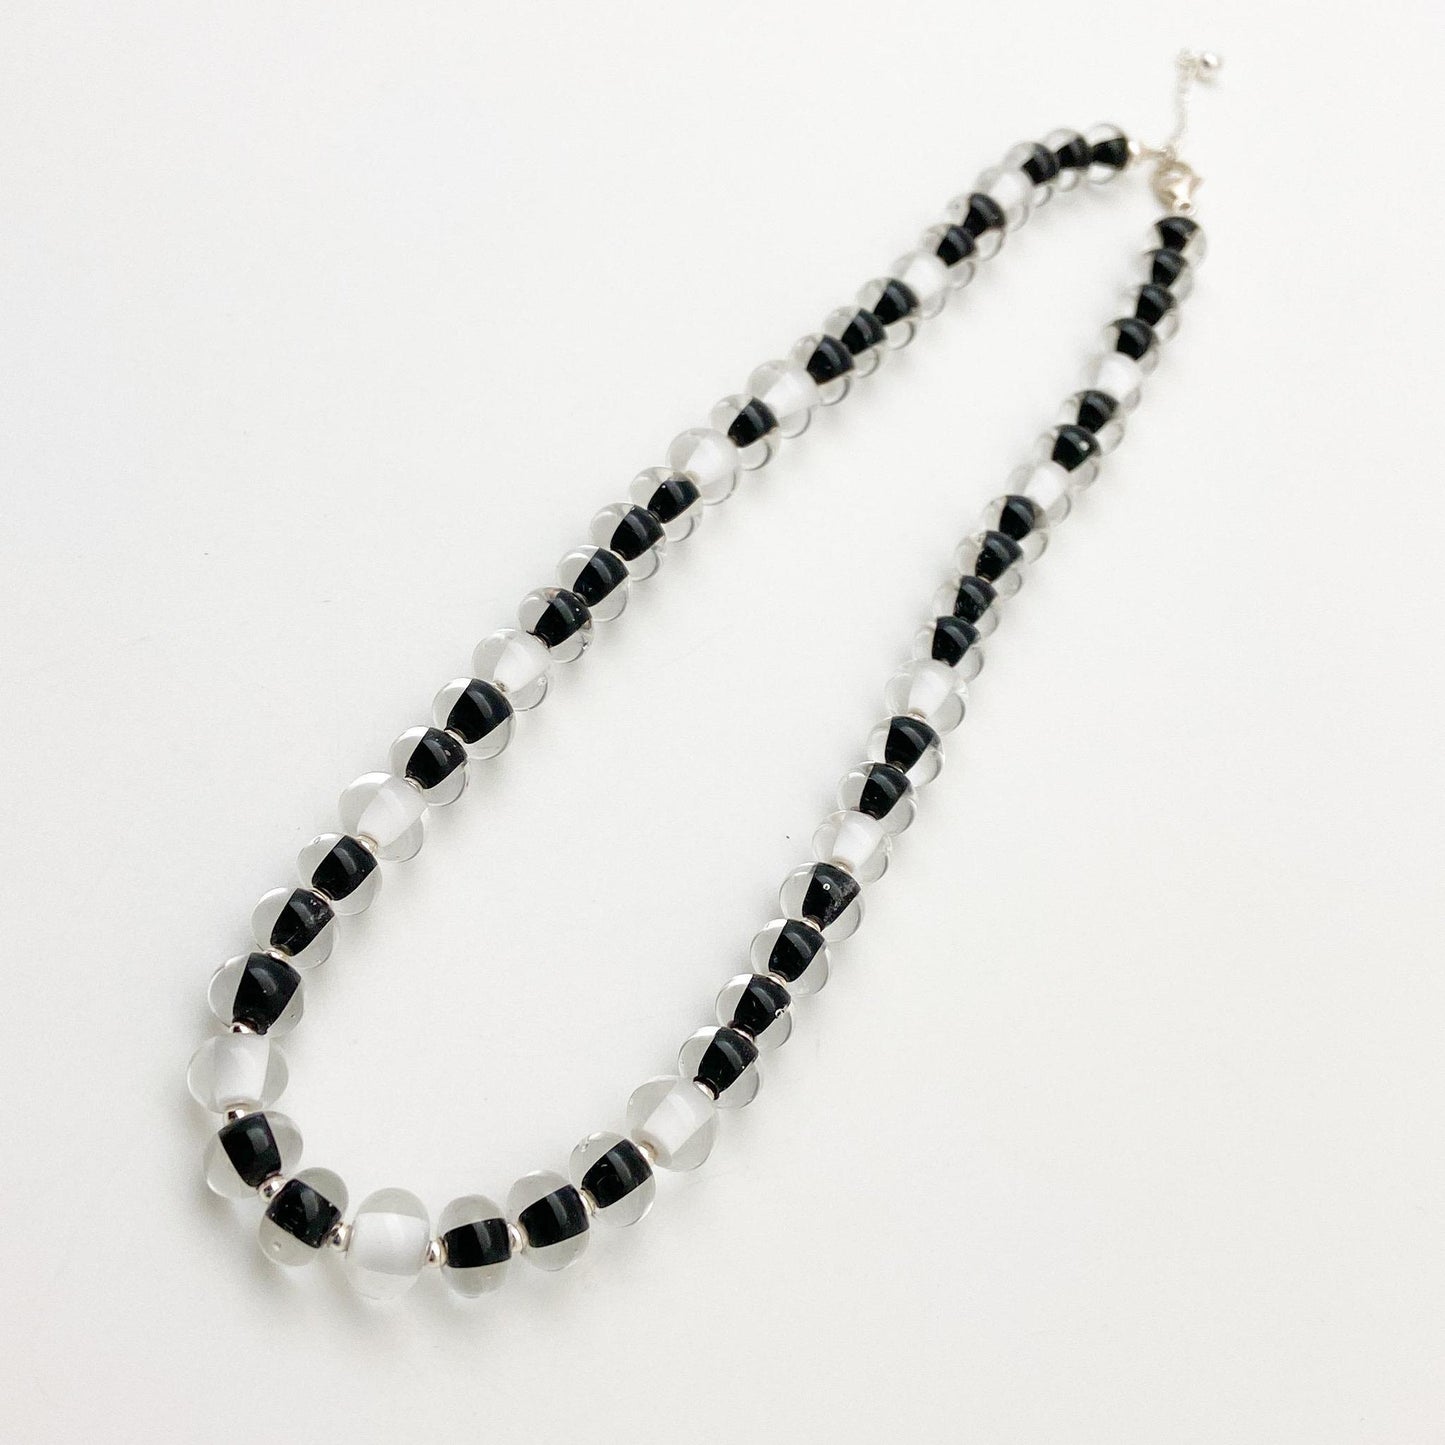 Necklace - Black and White Glass Beads - Handmade Glass - 18"